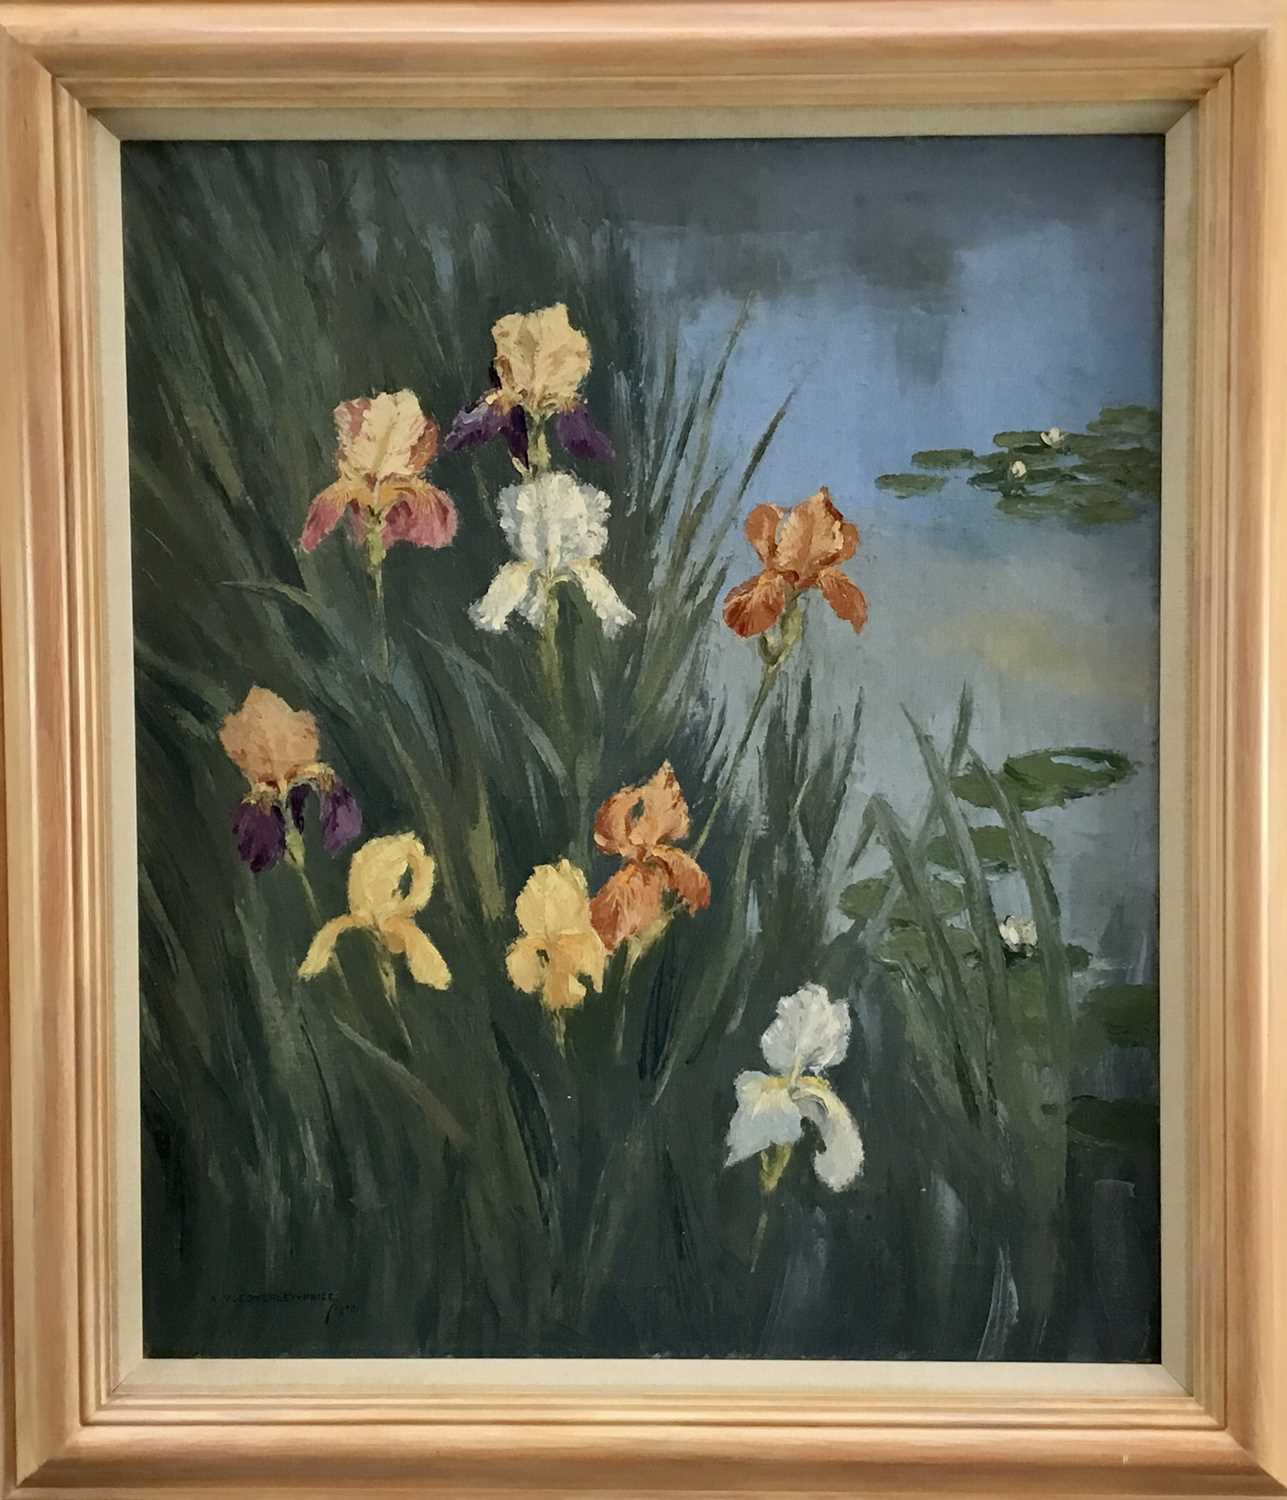 Lot 60 - A. V. Coverley-Price (1901-1948) oil on canvas - 'Irises', signed and dated 1948, 55cm x 65cm, framed